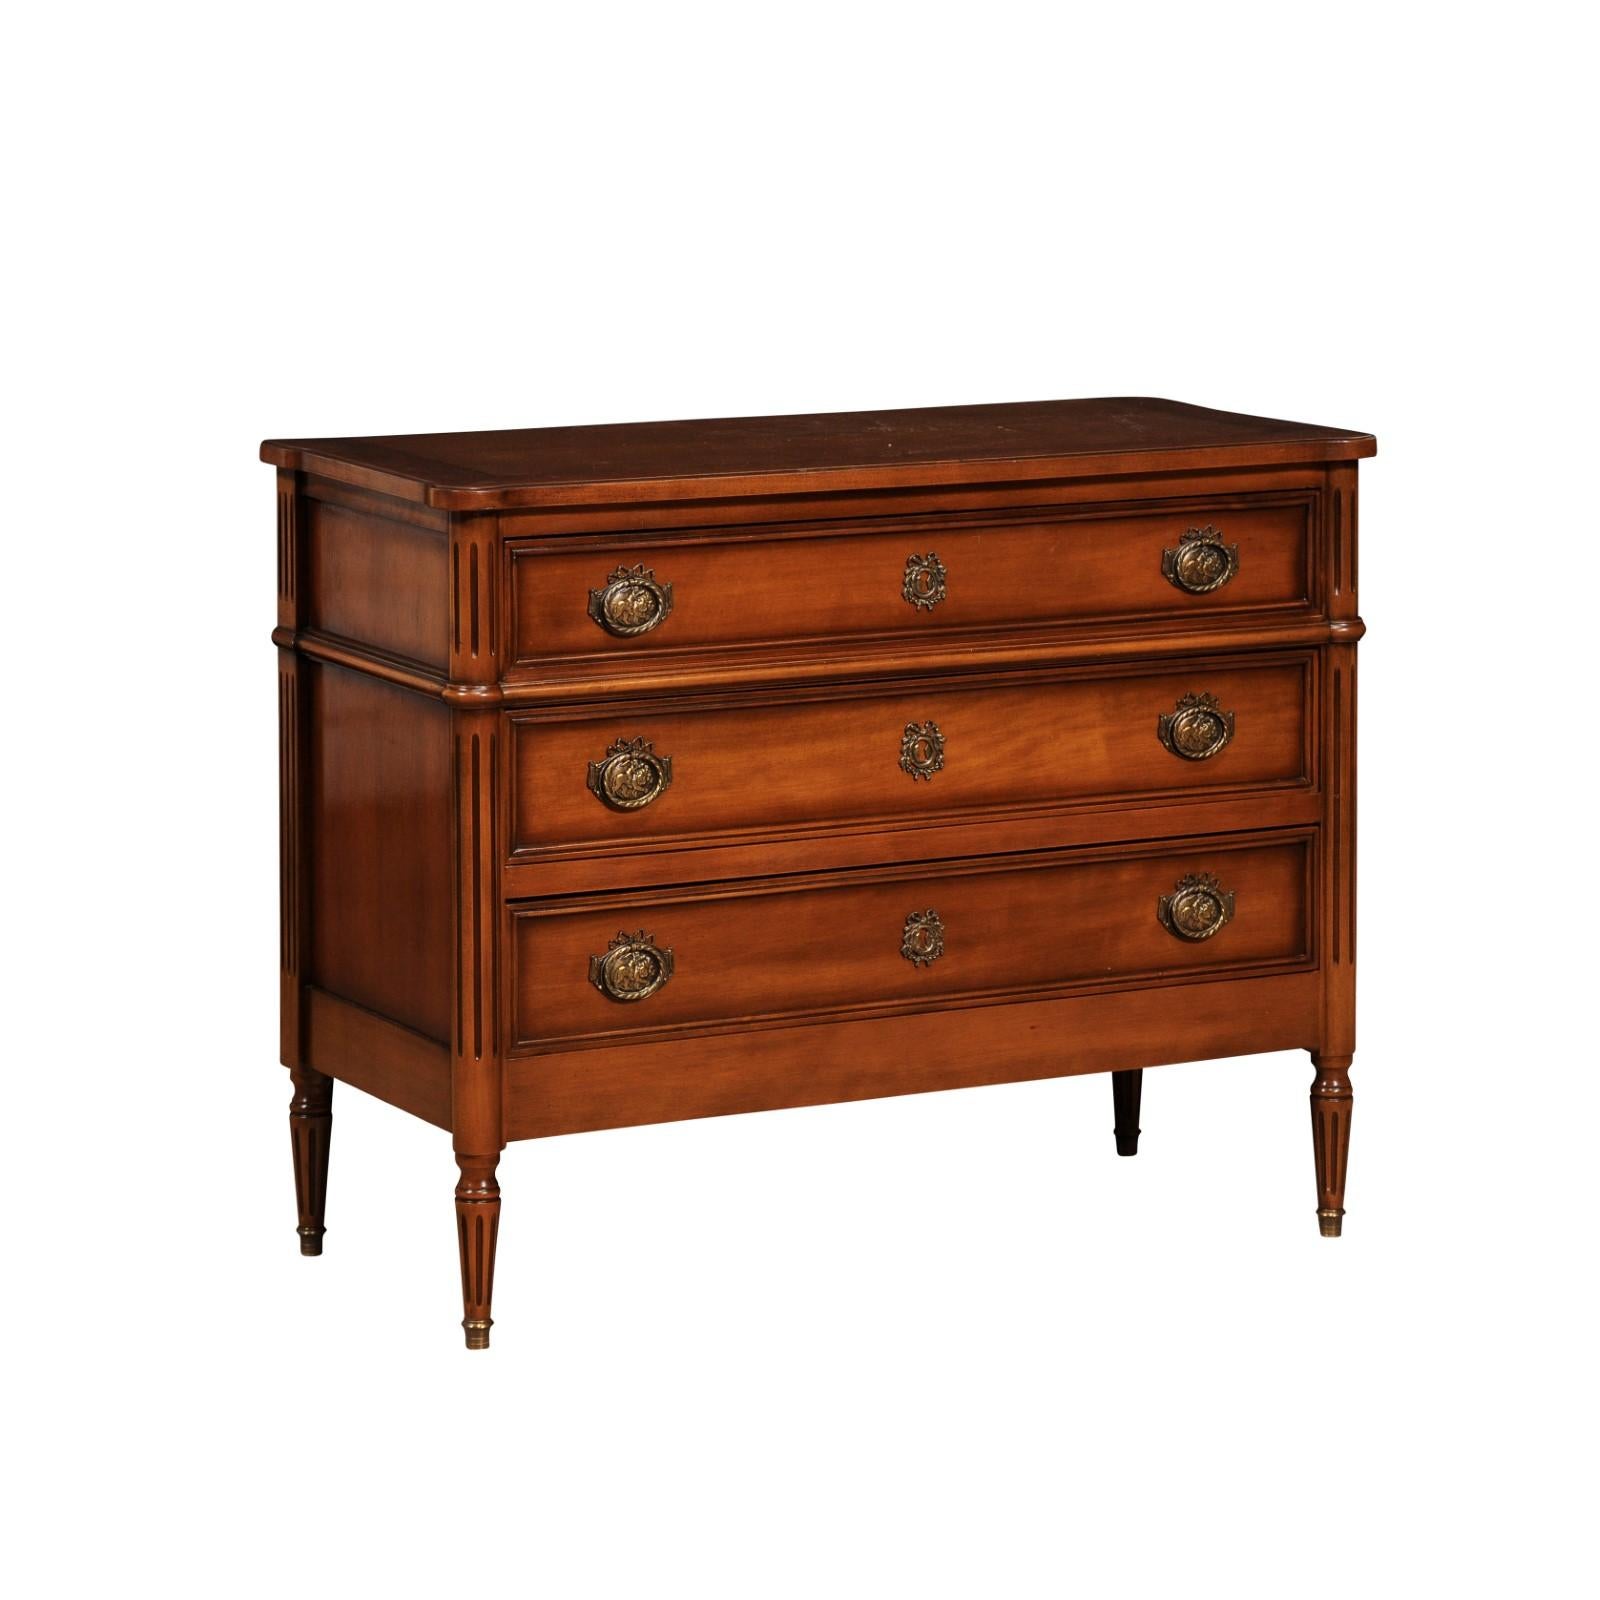 A French Louis XVI style light walnut commode from the 20th century with three drawers, fluted side posts and legs, ornate hardware. This French Louis XVI style light walnut commode from the 20th century elegantly captures the refined aesthetics of